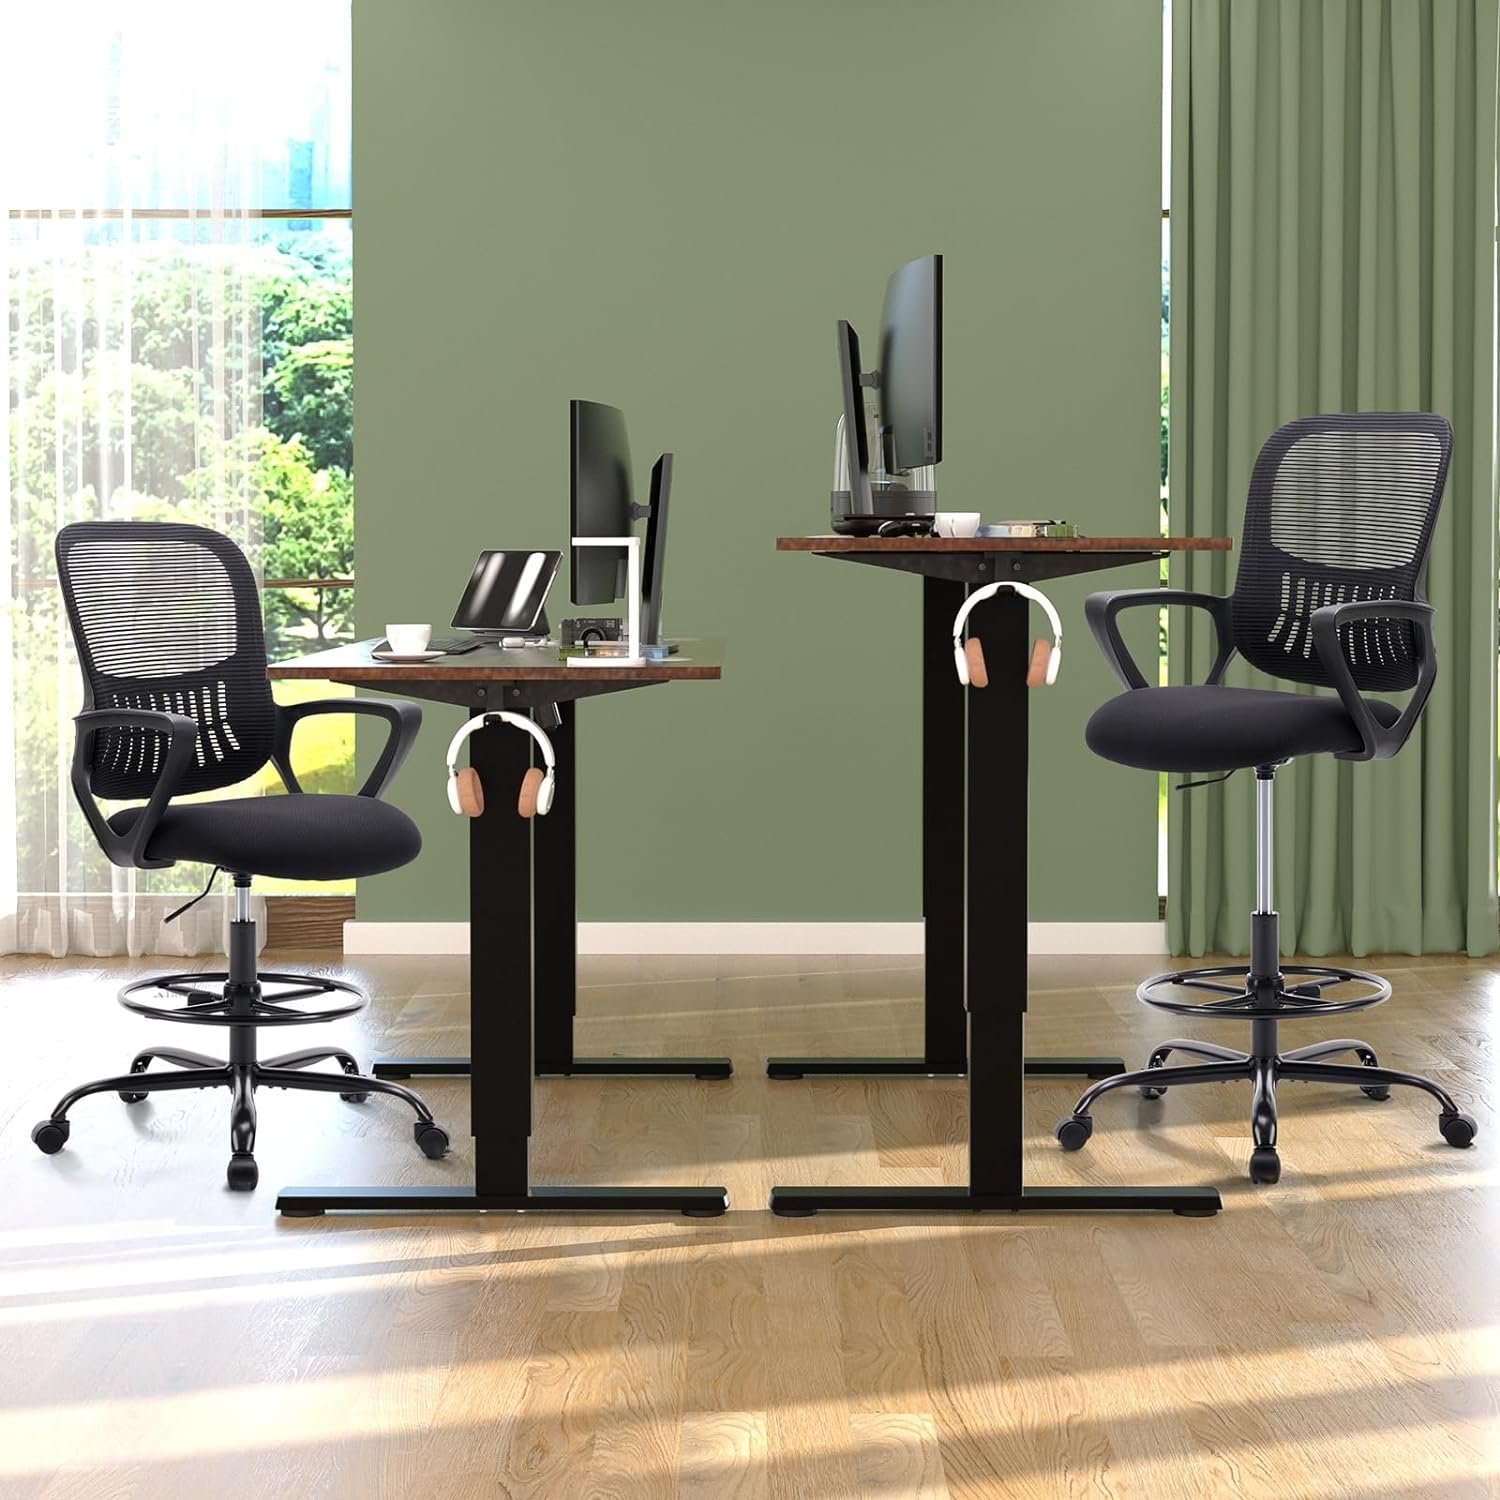 SMUG Adjustable Counter Height Office Chair Review